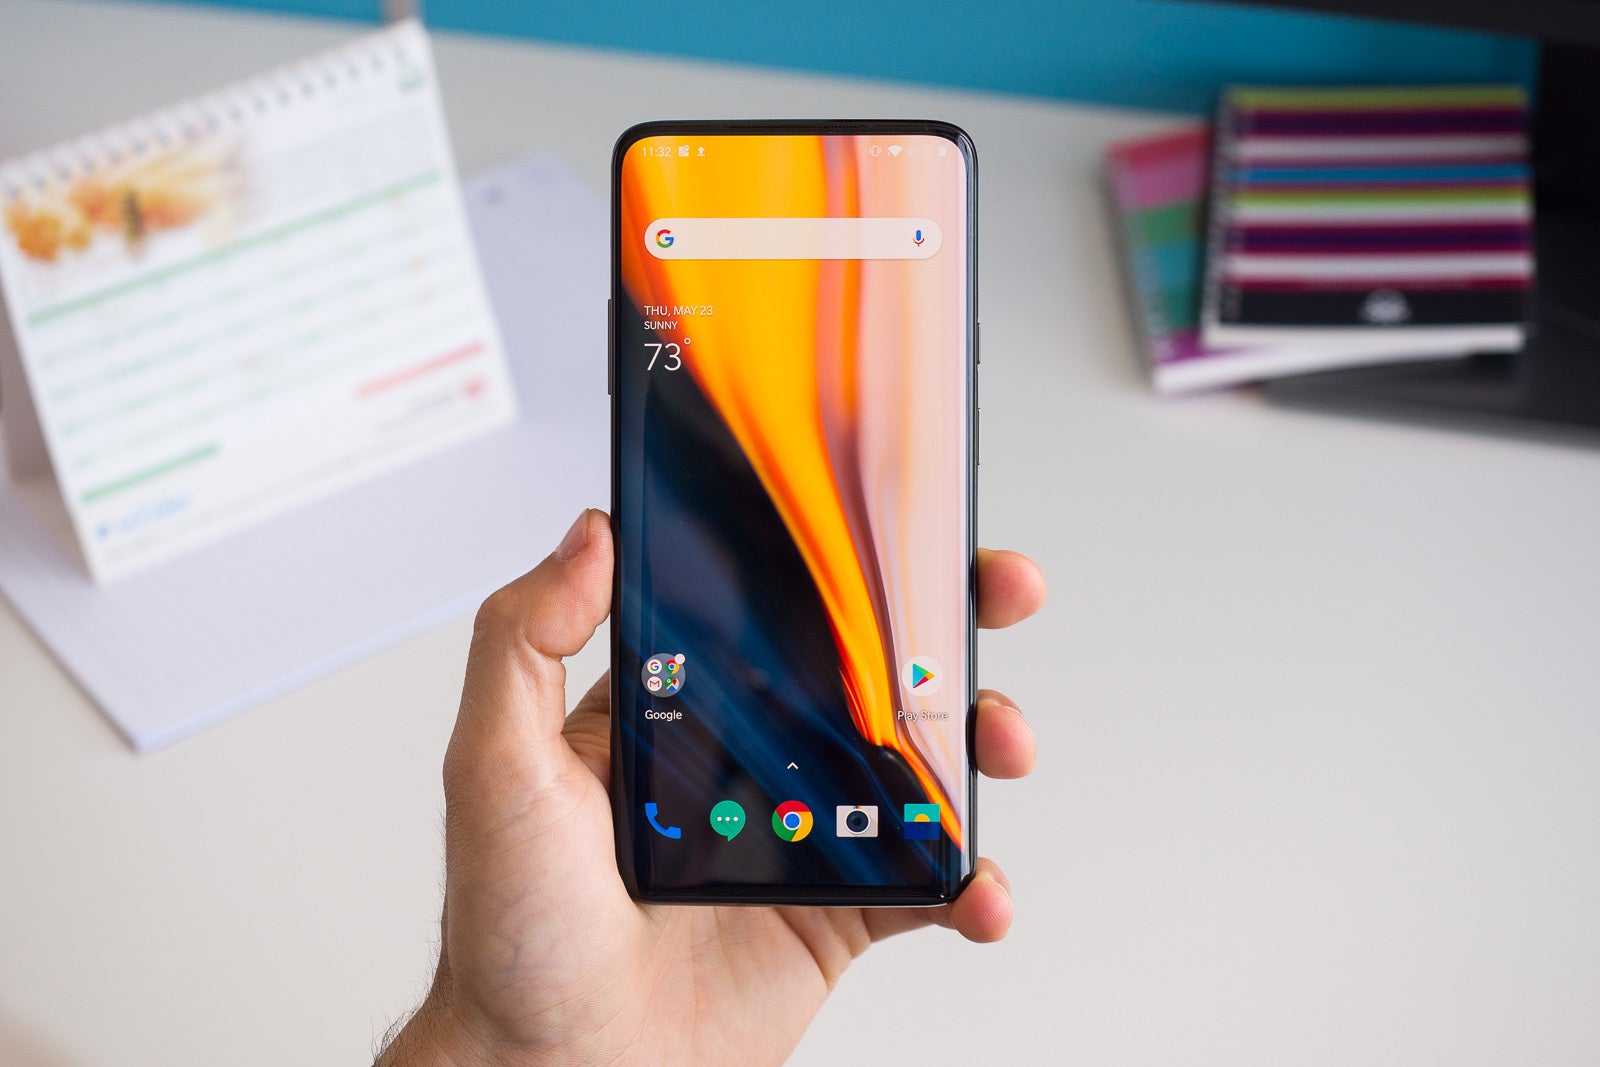 The OnePlus 7 Pro - Here's what the OnePlus 7T & 7T Pro might look like from the rear